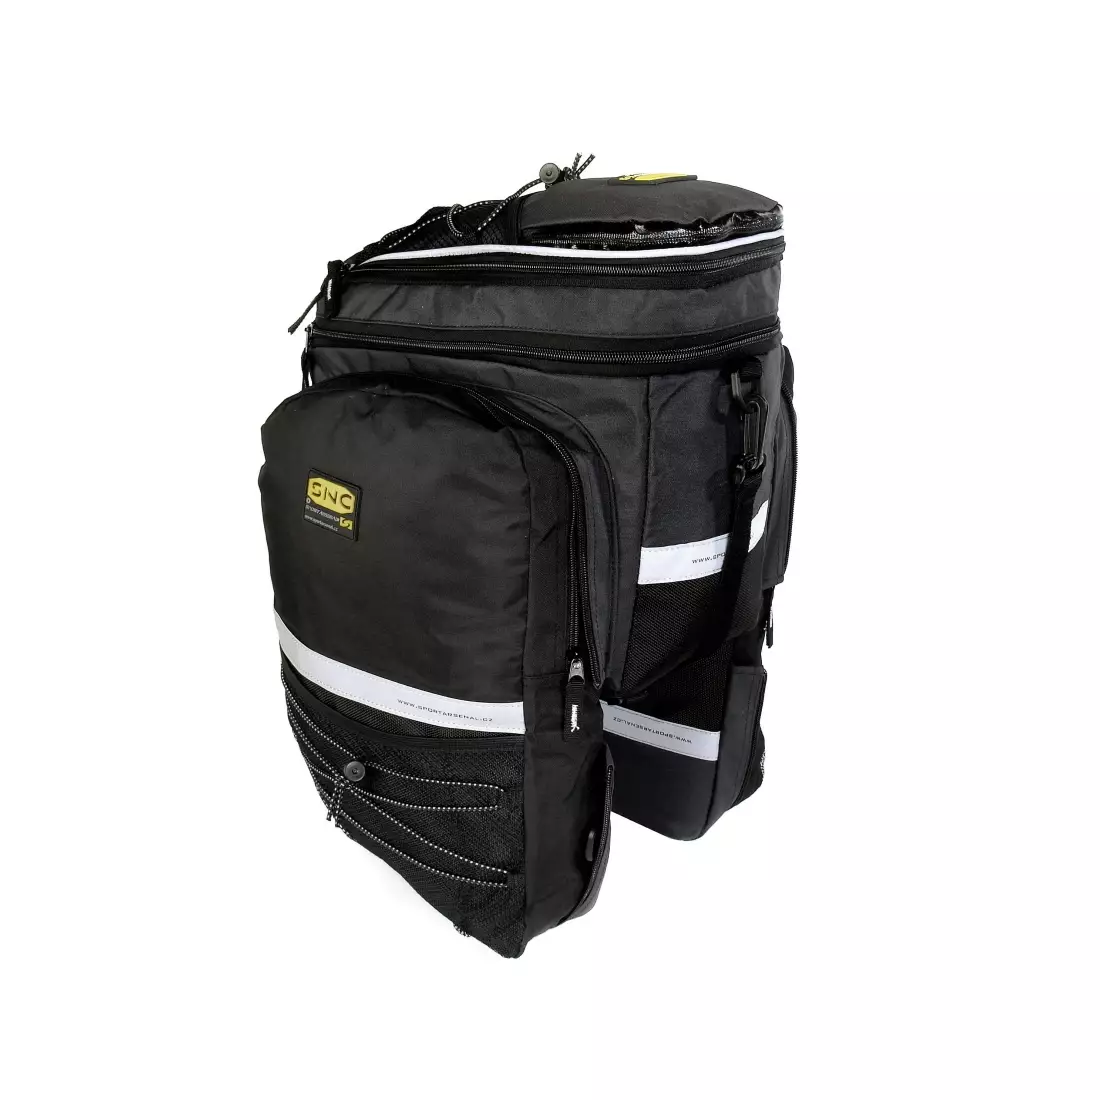 SPORT ARSENAL SNC 550 Multifunctional pannier for the trunk